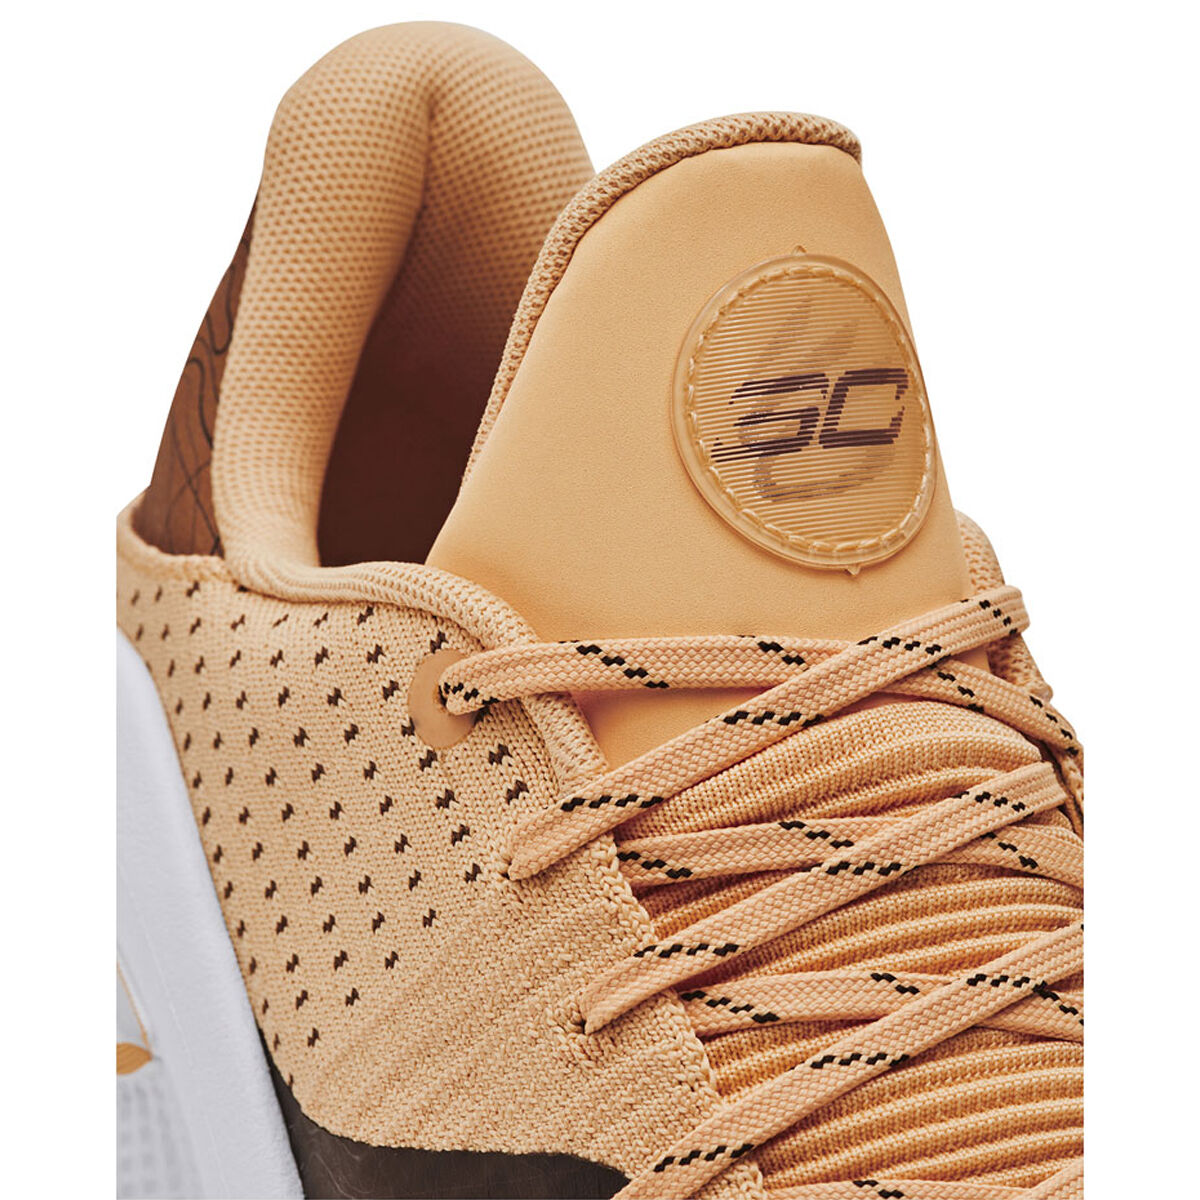 Under Armour Curry 4 Flotro Camp Curry Basketball Shoes